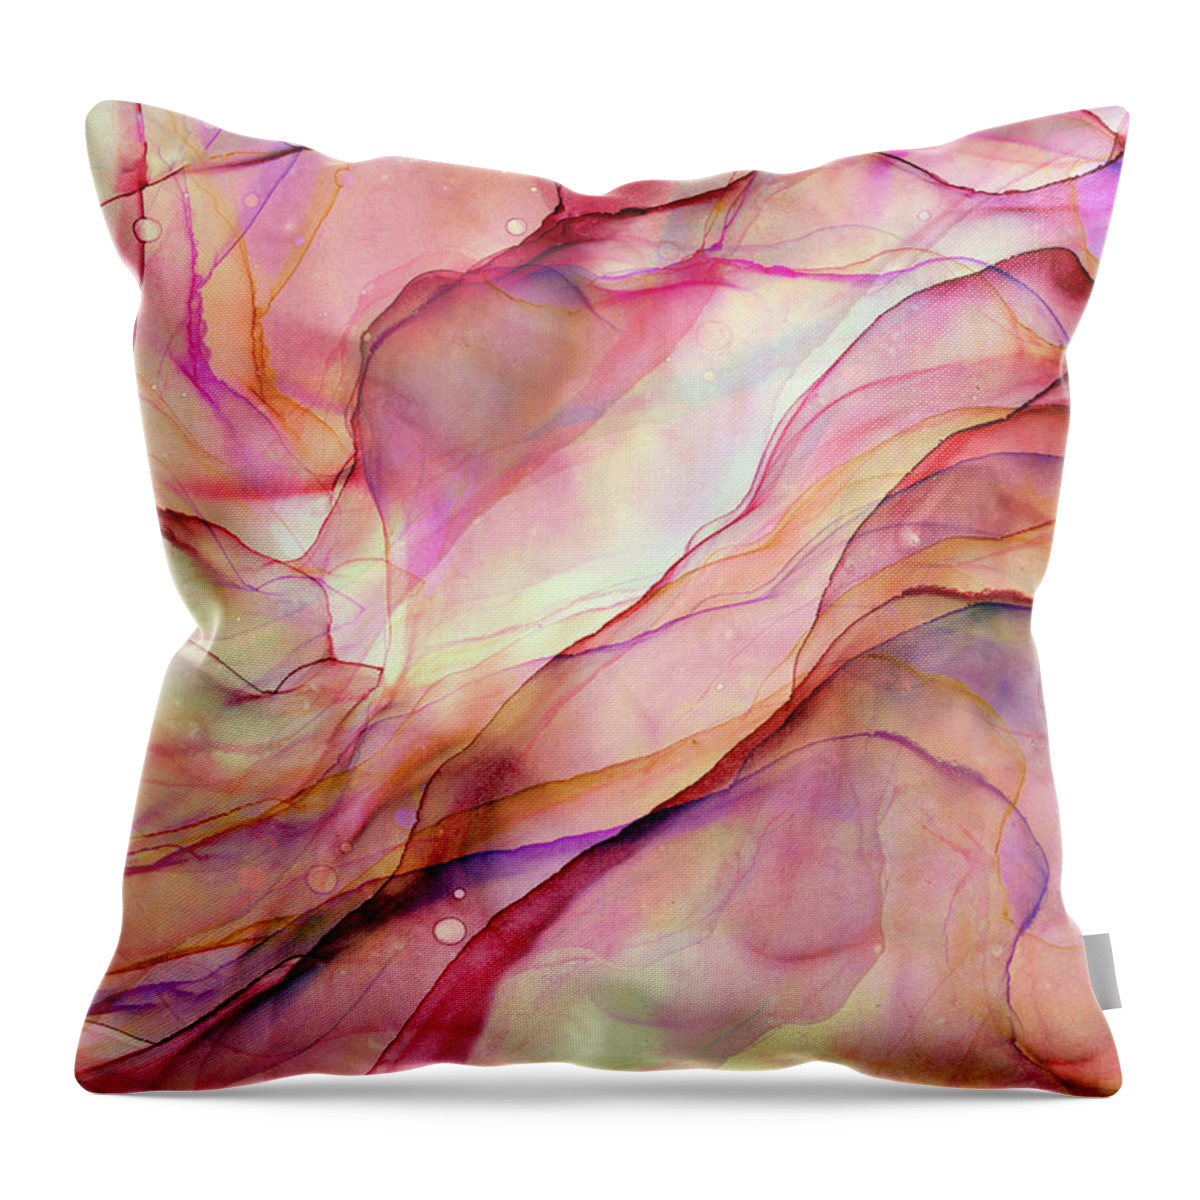 Coral Throw Pillow featuring the painting Flowing Coral Abstract Ink by Olga Shvartsur